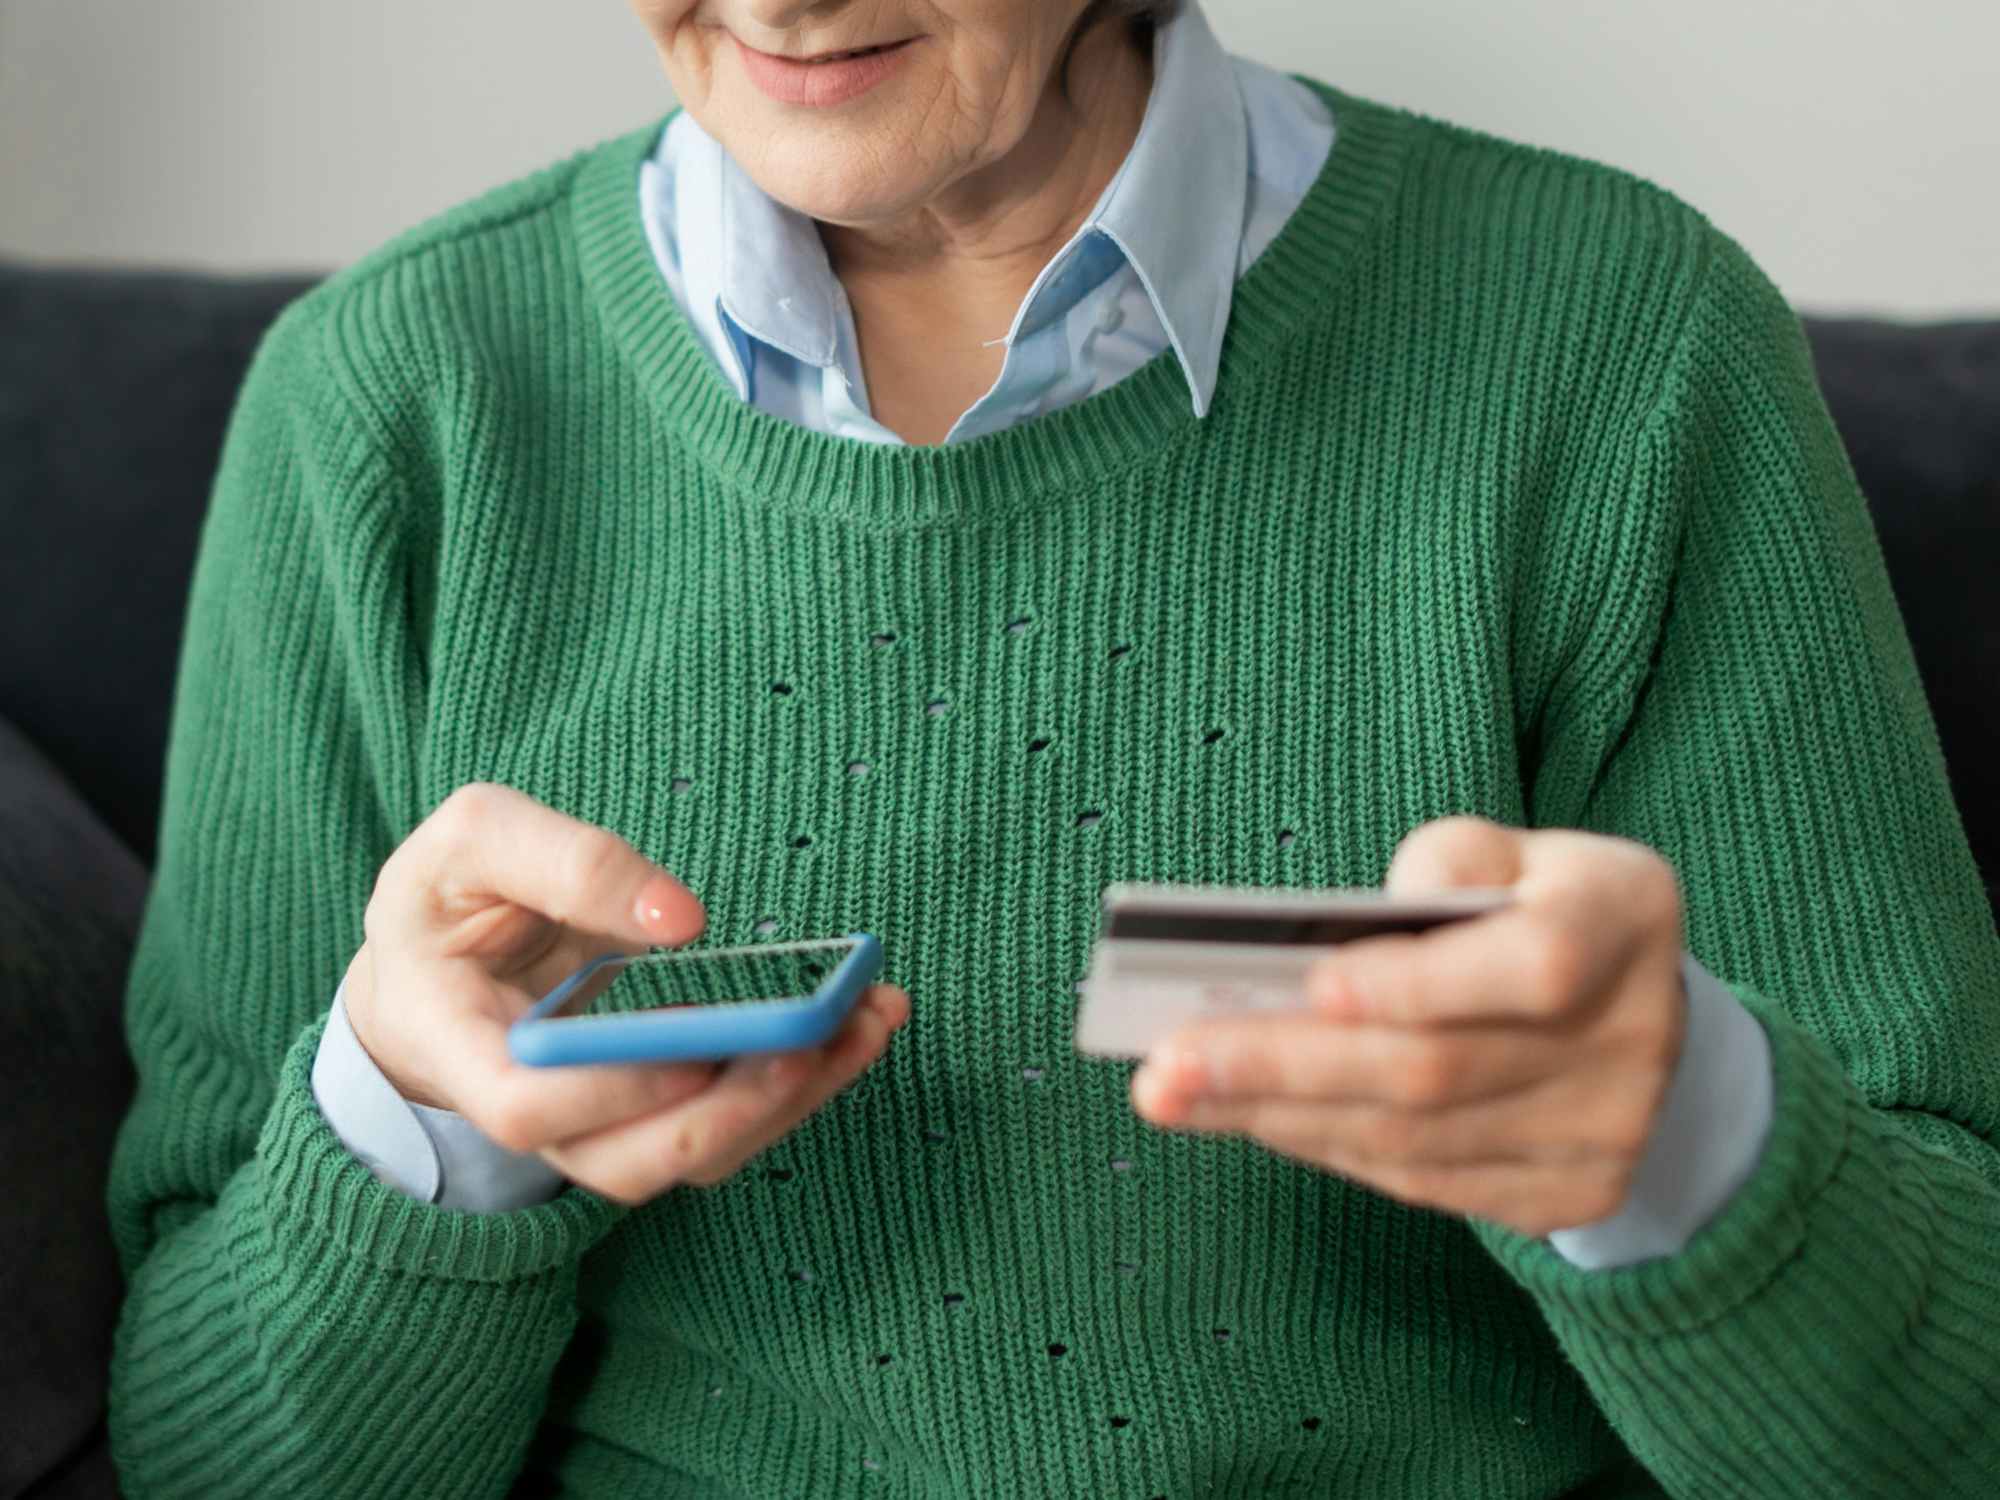 a person making a payment on their phone